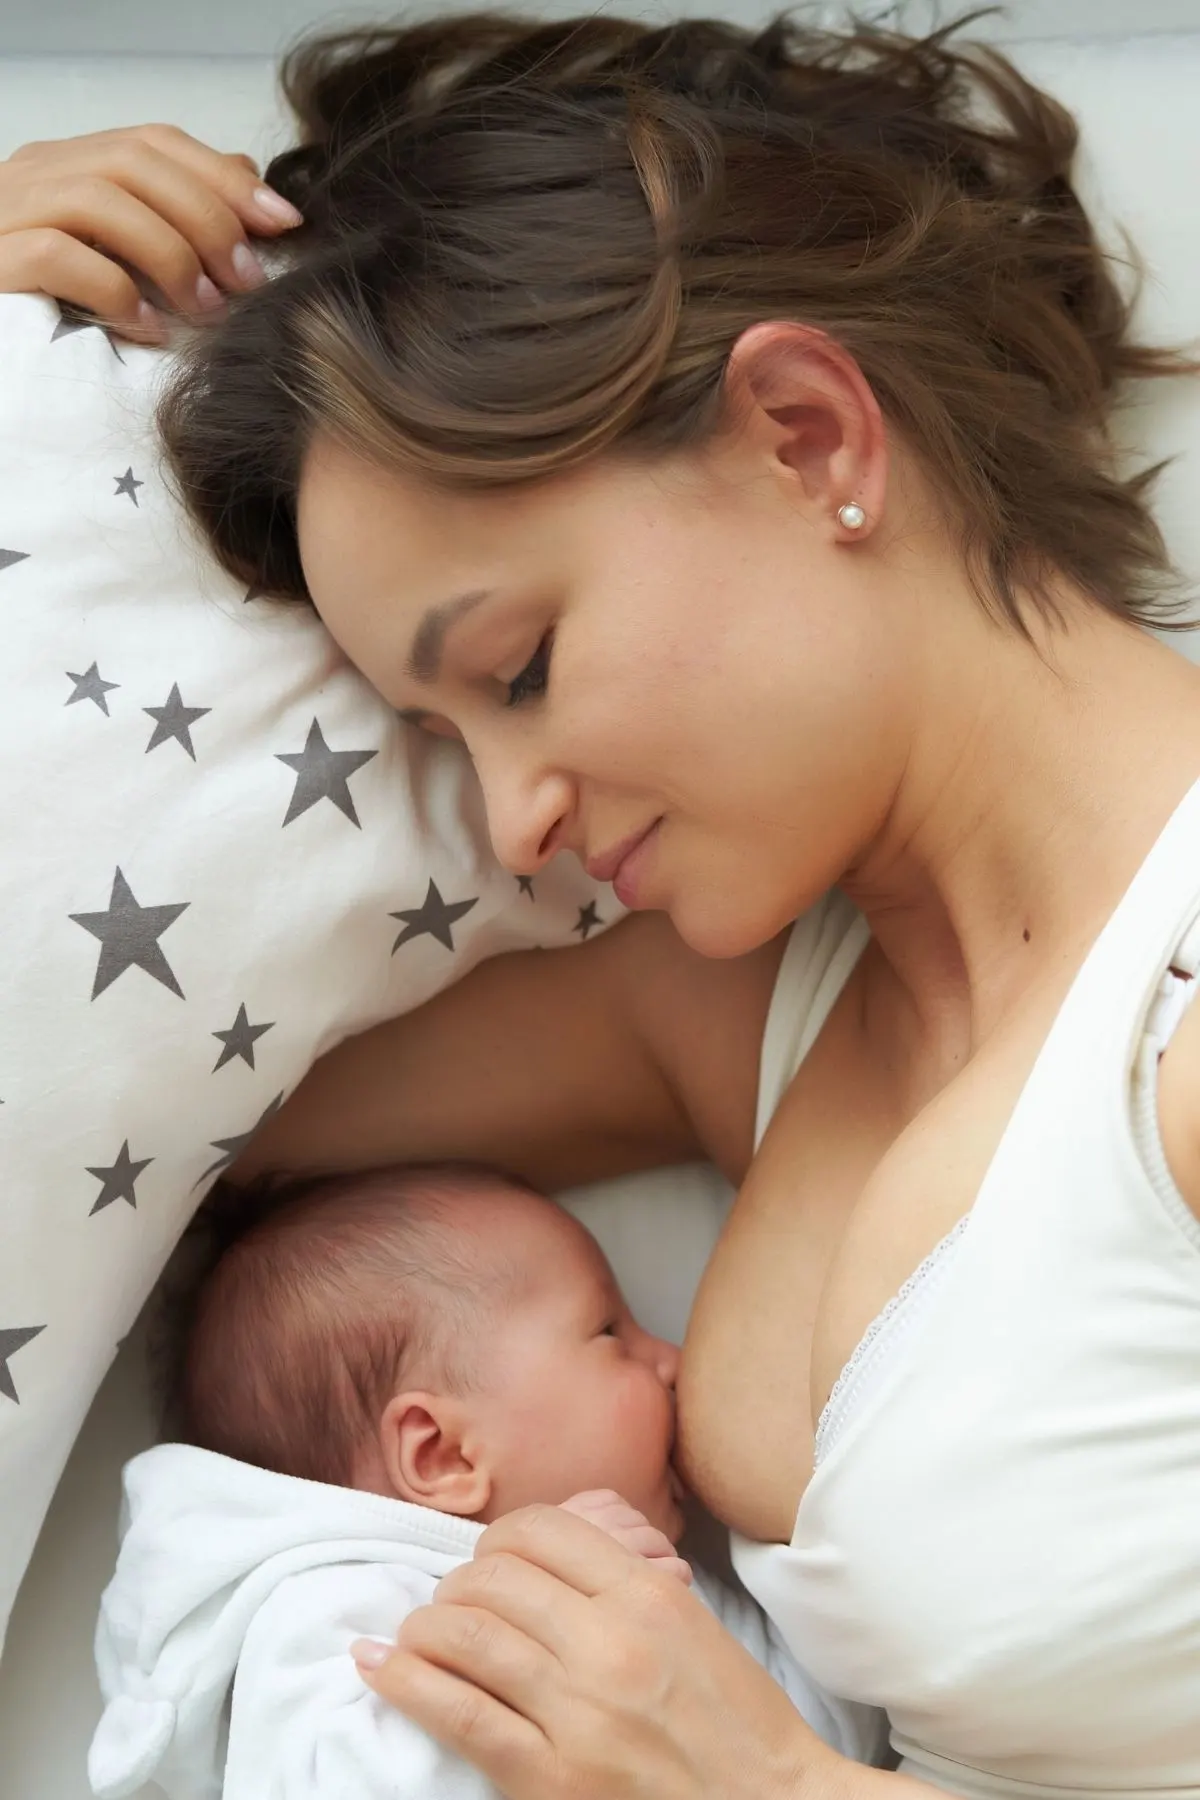 Brunette woman breastfeeds baby while laying down on a white nursing pillow with gray stars.